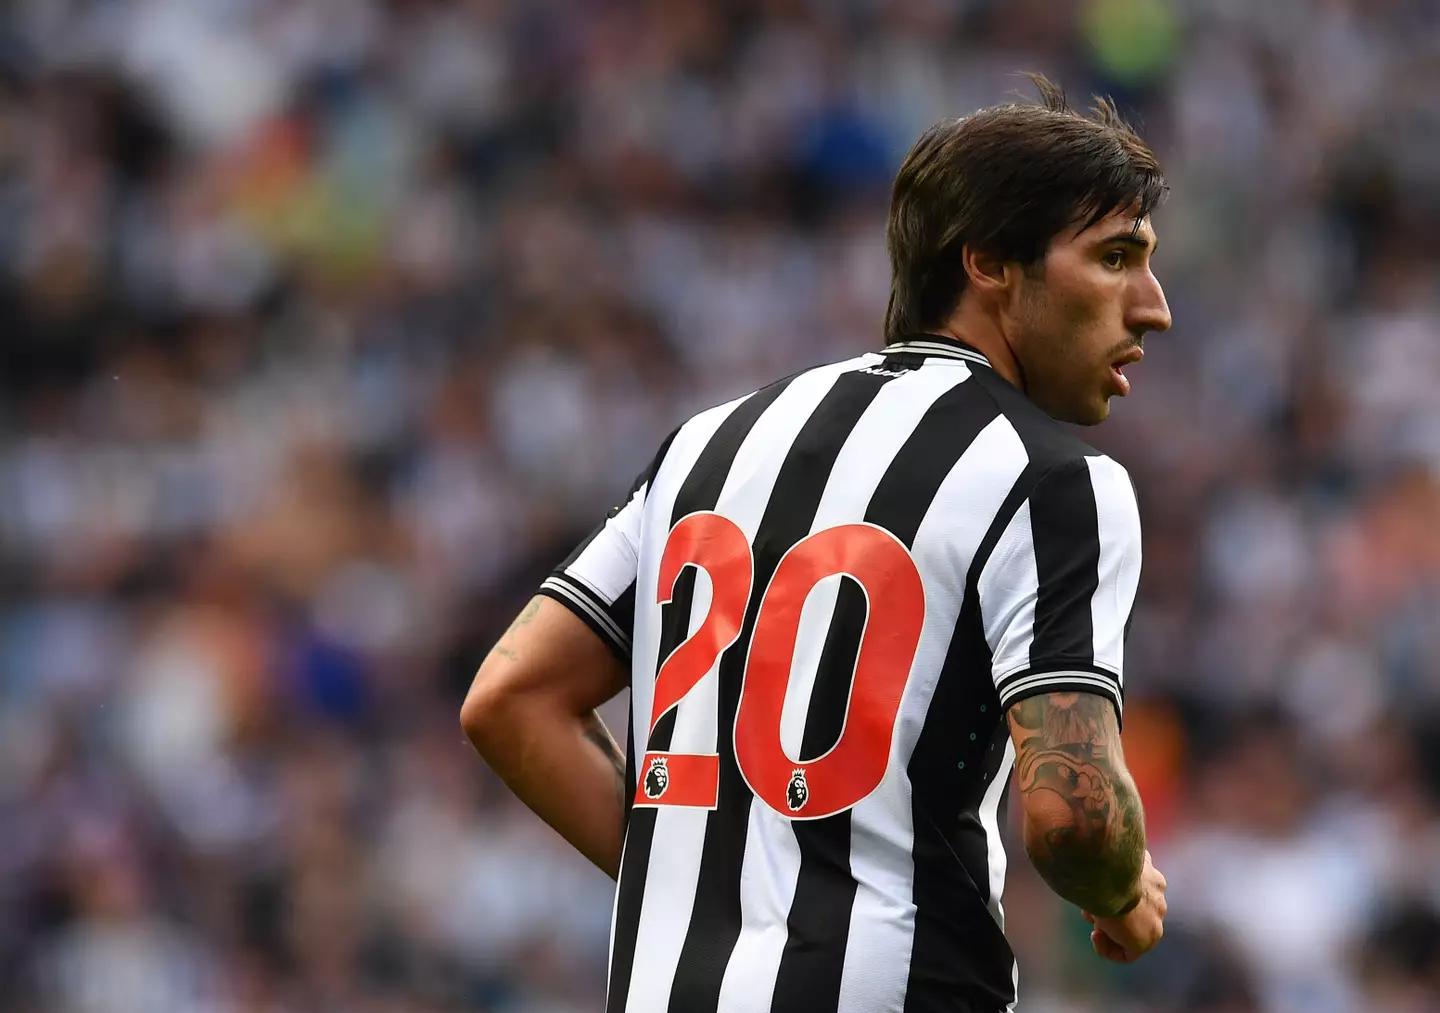 Sandro Tonali could play a key role for Newcastle in 2023/24. (Image: Getty)